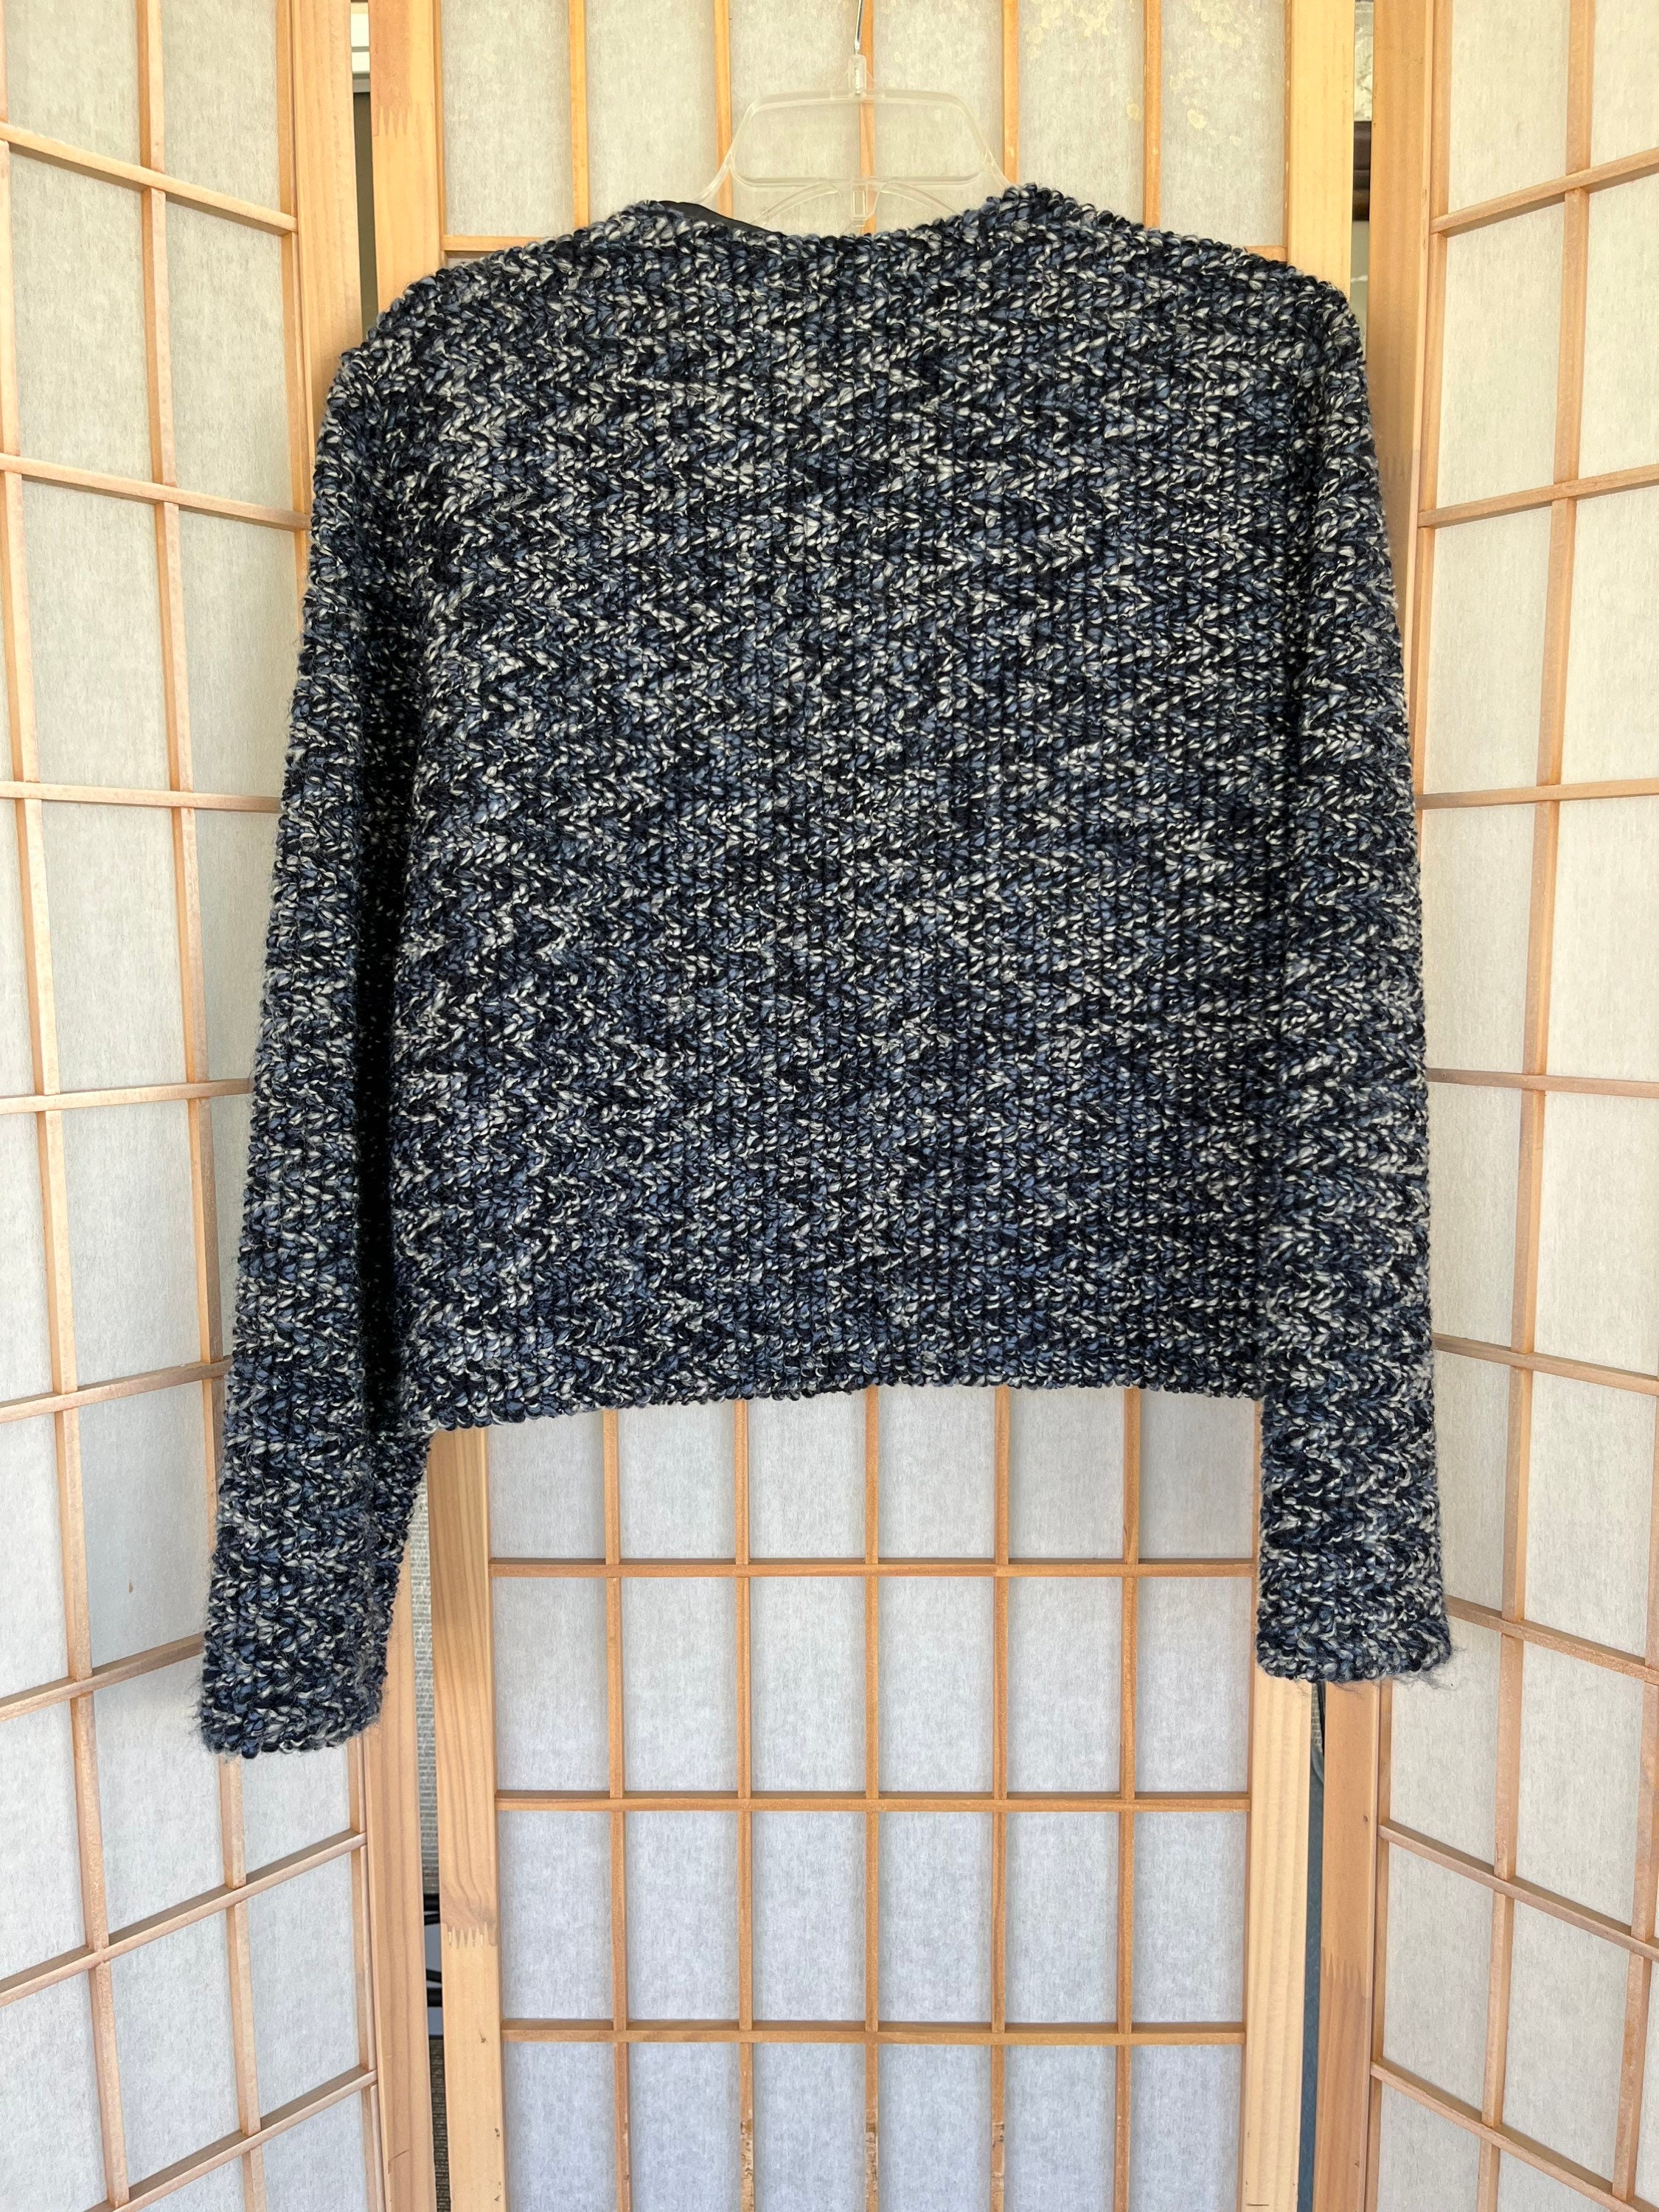 Vintage Knitted by Hand Sweater Ladies Size M - Etsy